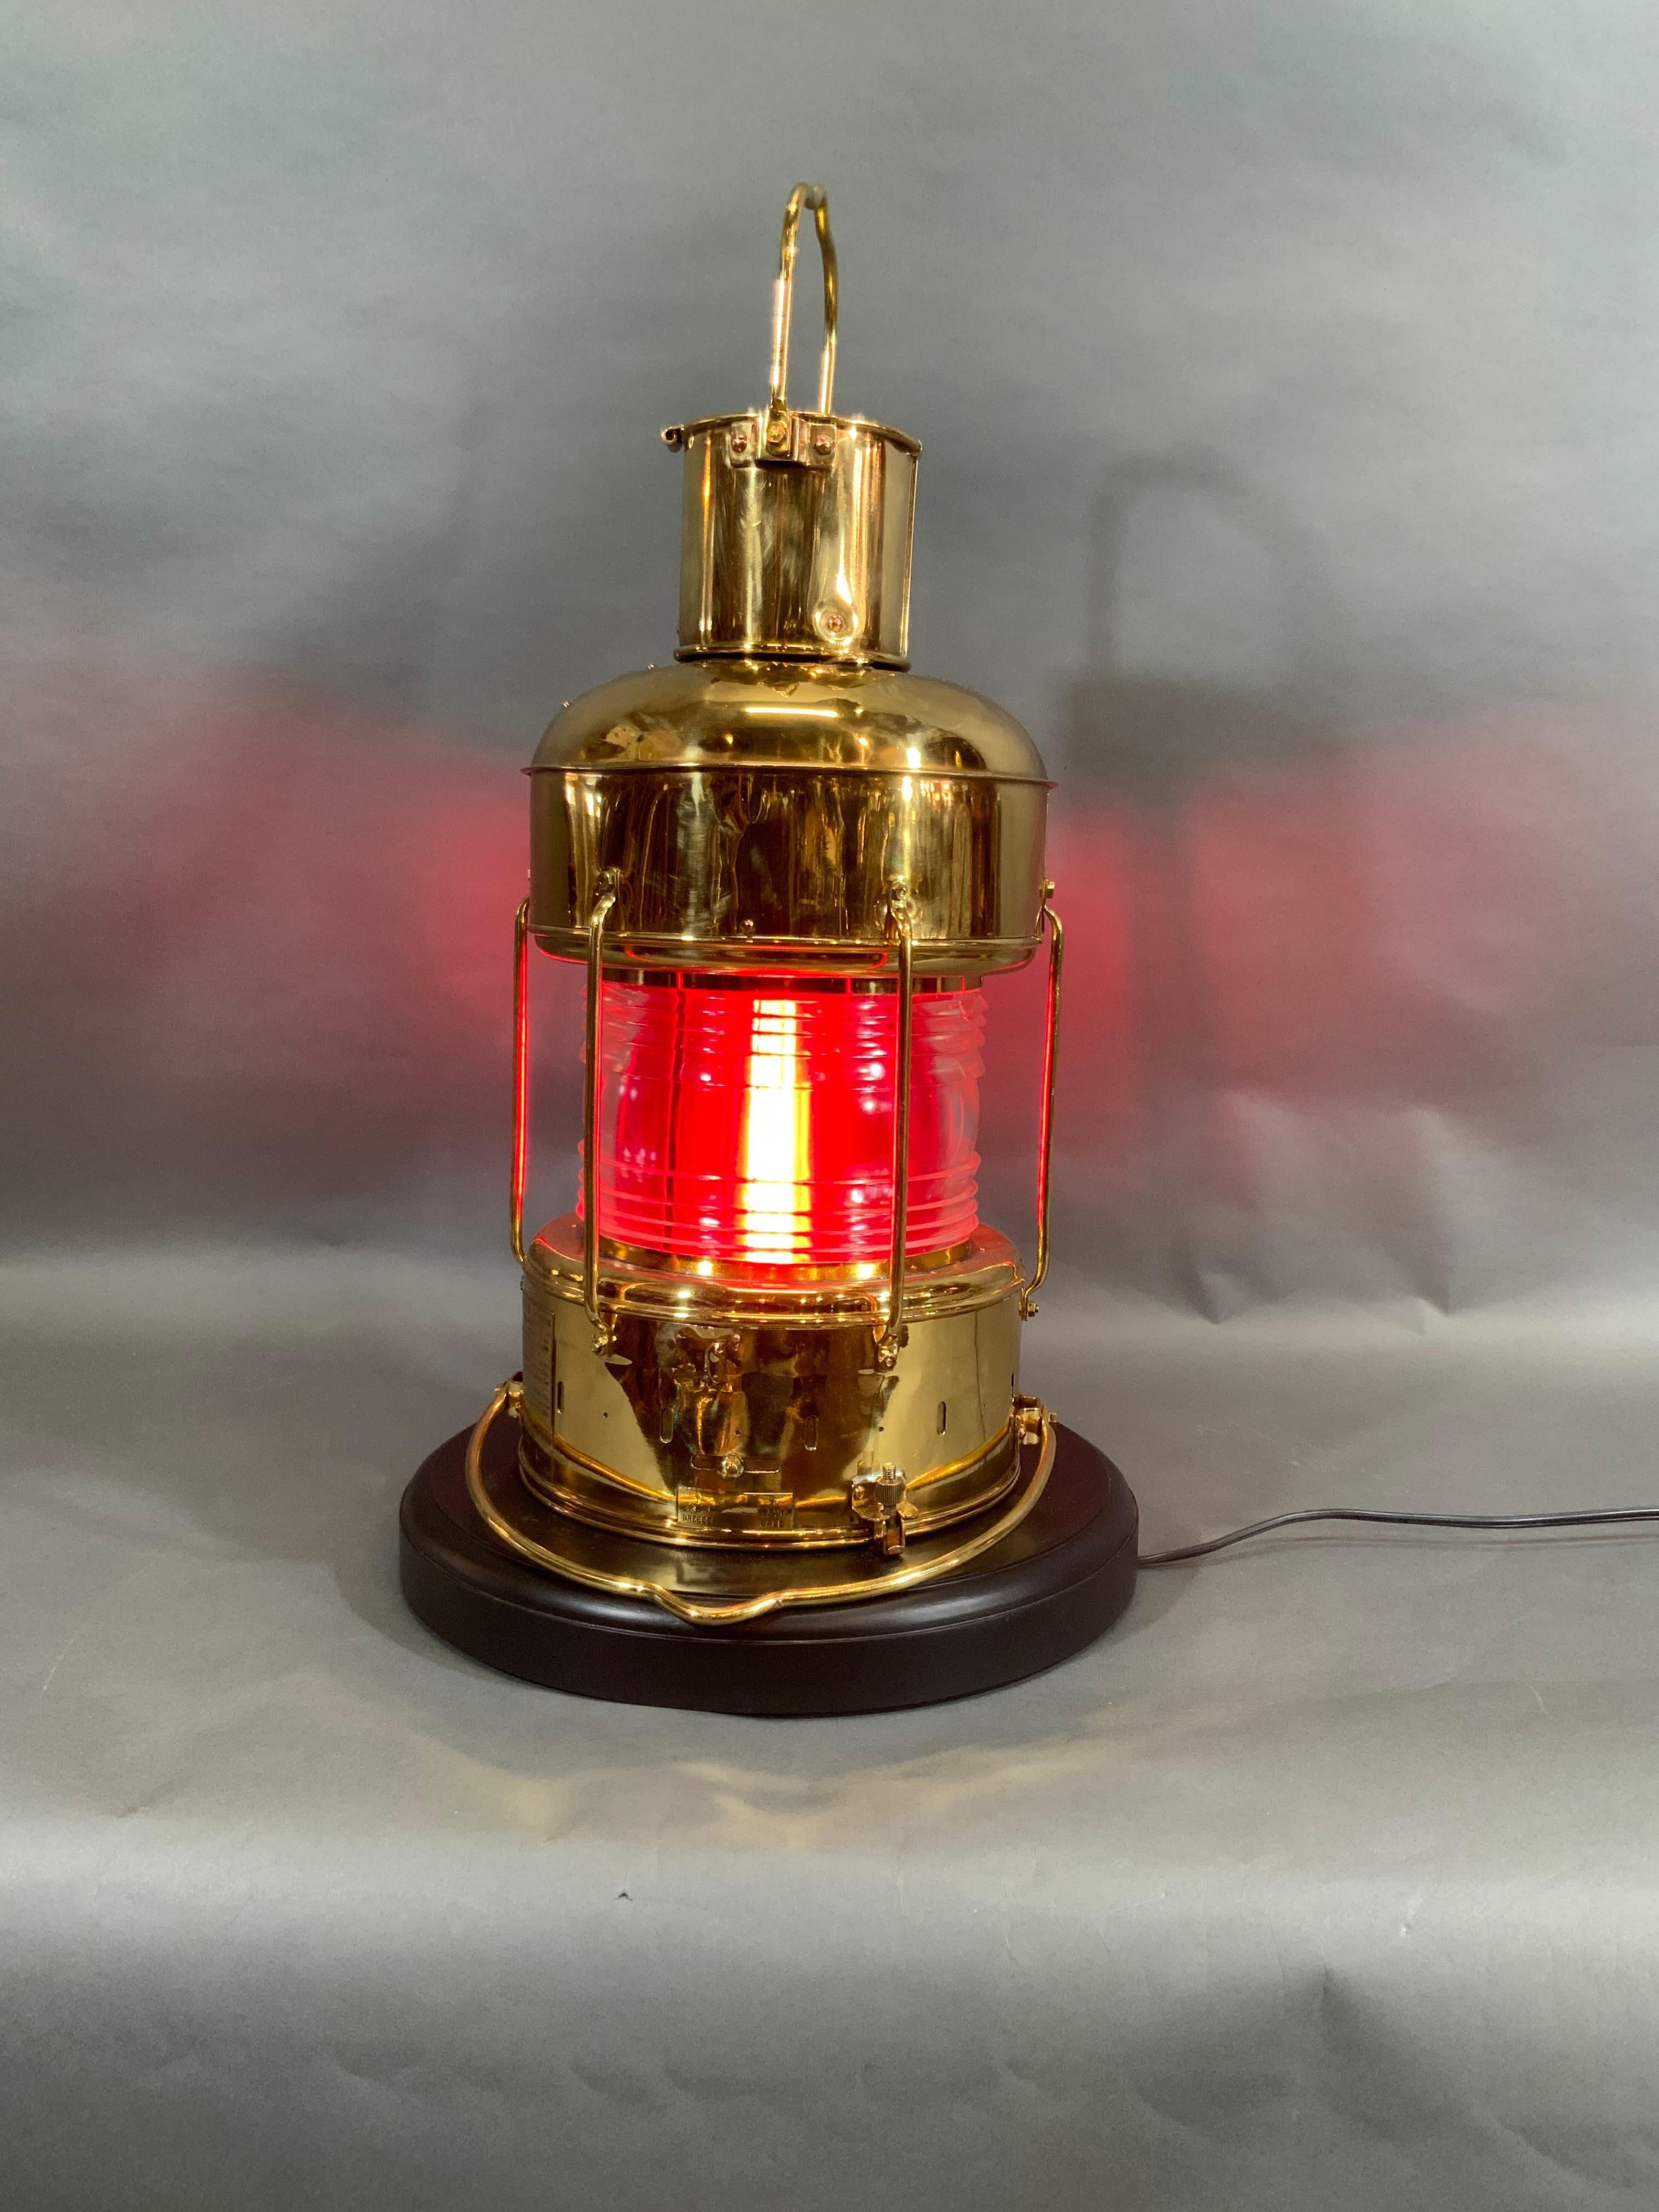 Solid brass ship's anchor lantern with glass Fresnel lens, internal removable red filter, hoisting handle, wiring for home use, etc.. This lantern has been meticulously polished and lacquered. Mounted to a thick mahogany base.

Overall dimensions: